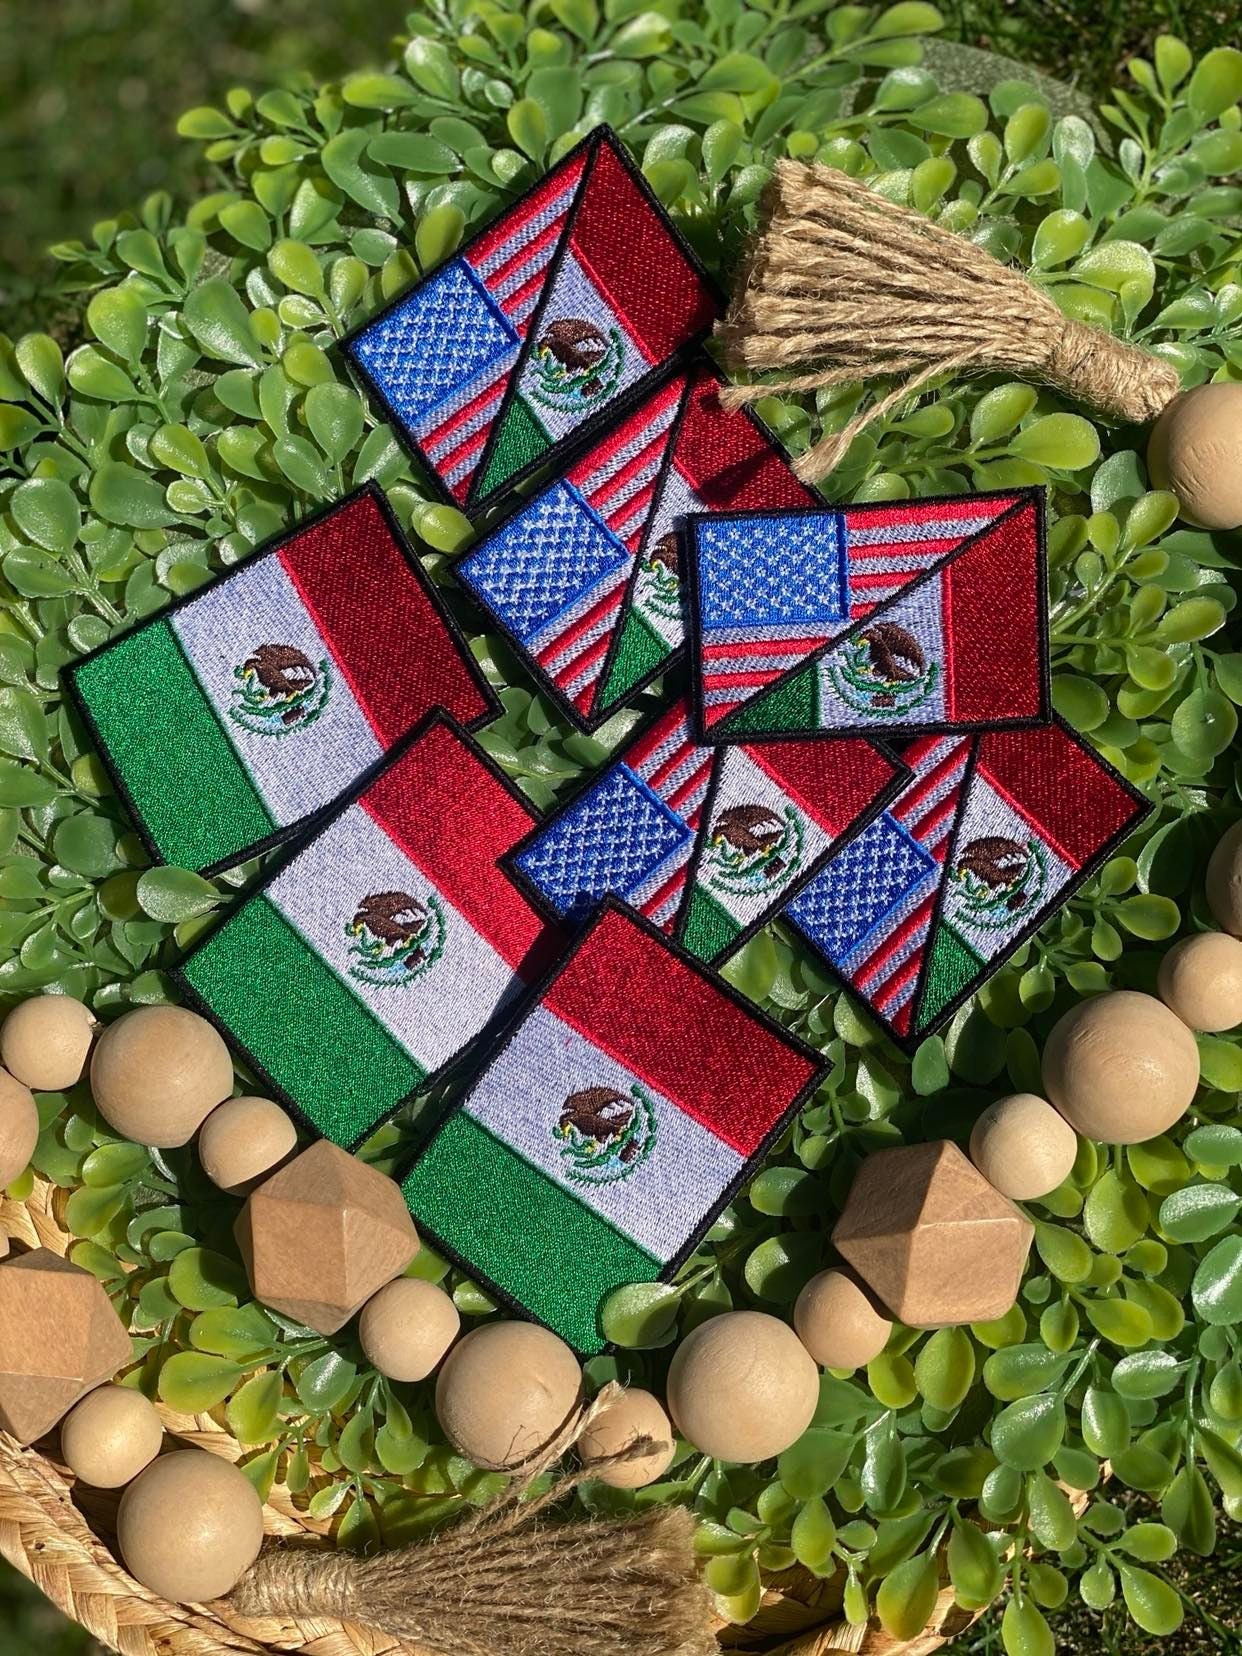 MEXICO mylar flag shield uniform or souvenir embroidered patch - 6492